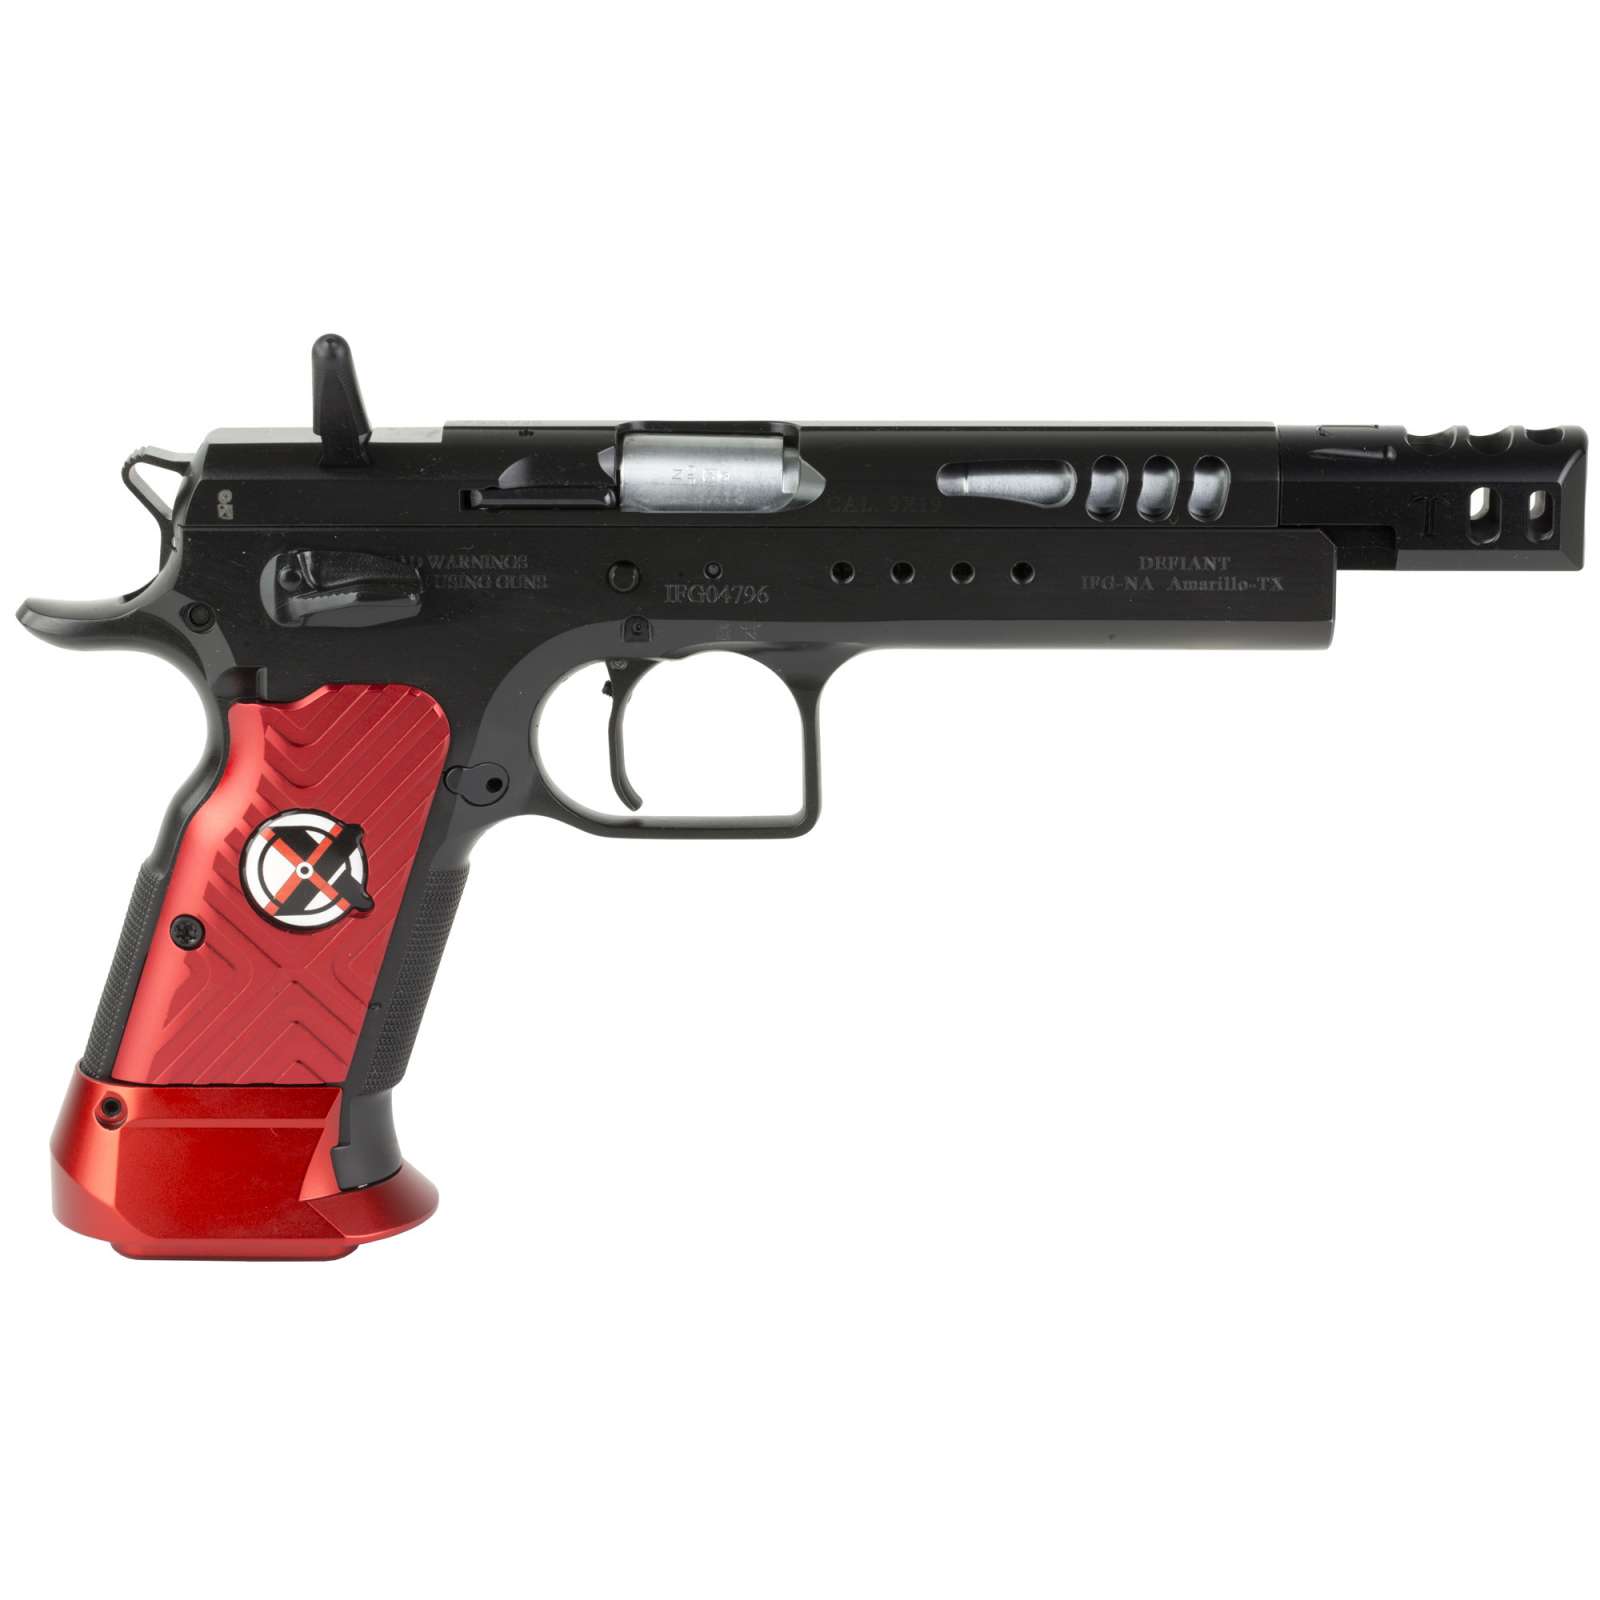 Tanfoglio Domina Xtreme IFG 9MM 5.2" 19+1 Red Grips TF-DOMX-9-img-1